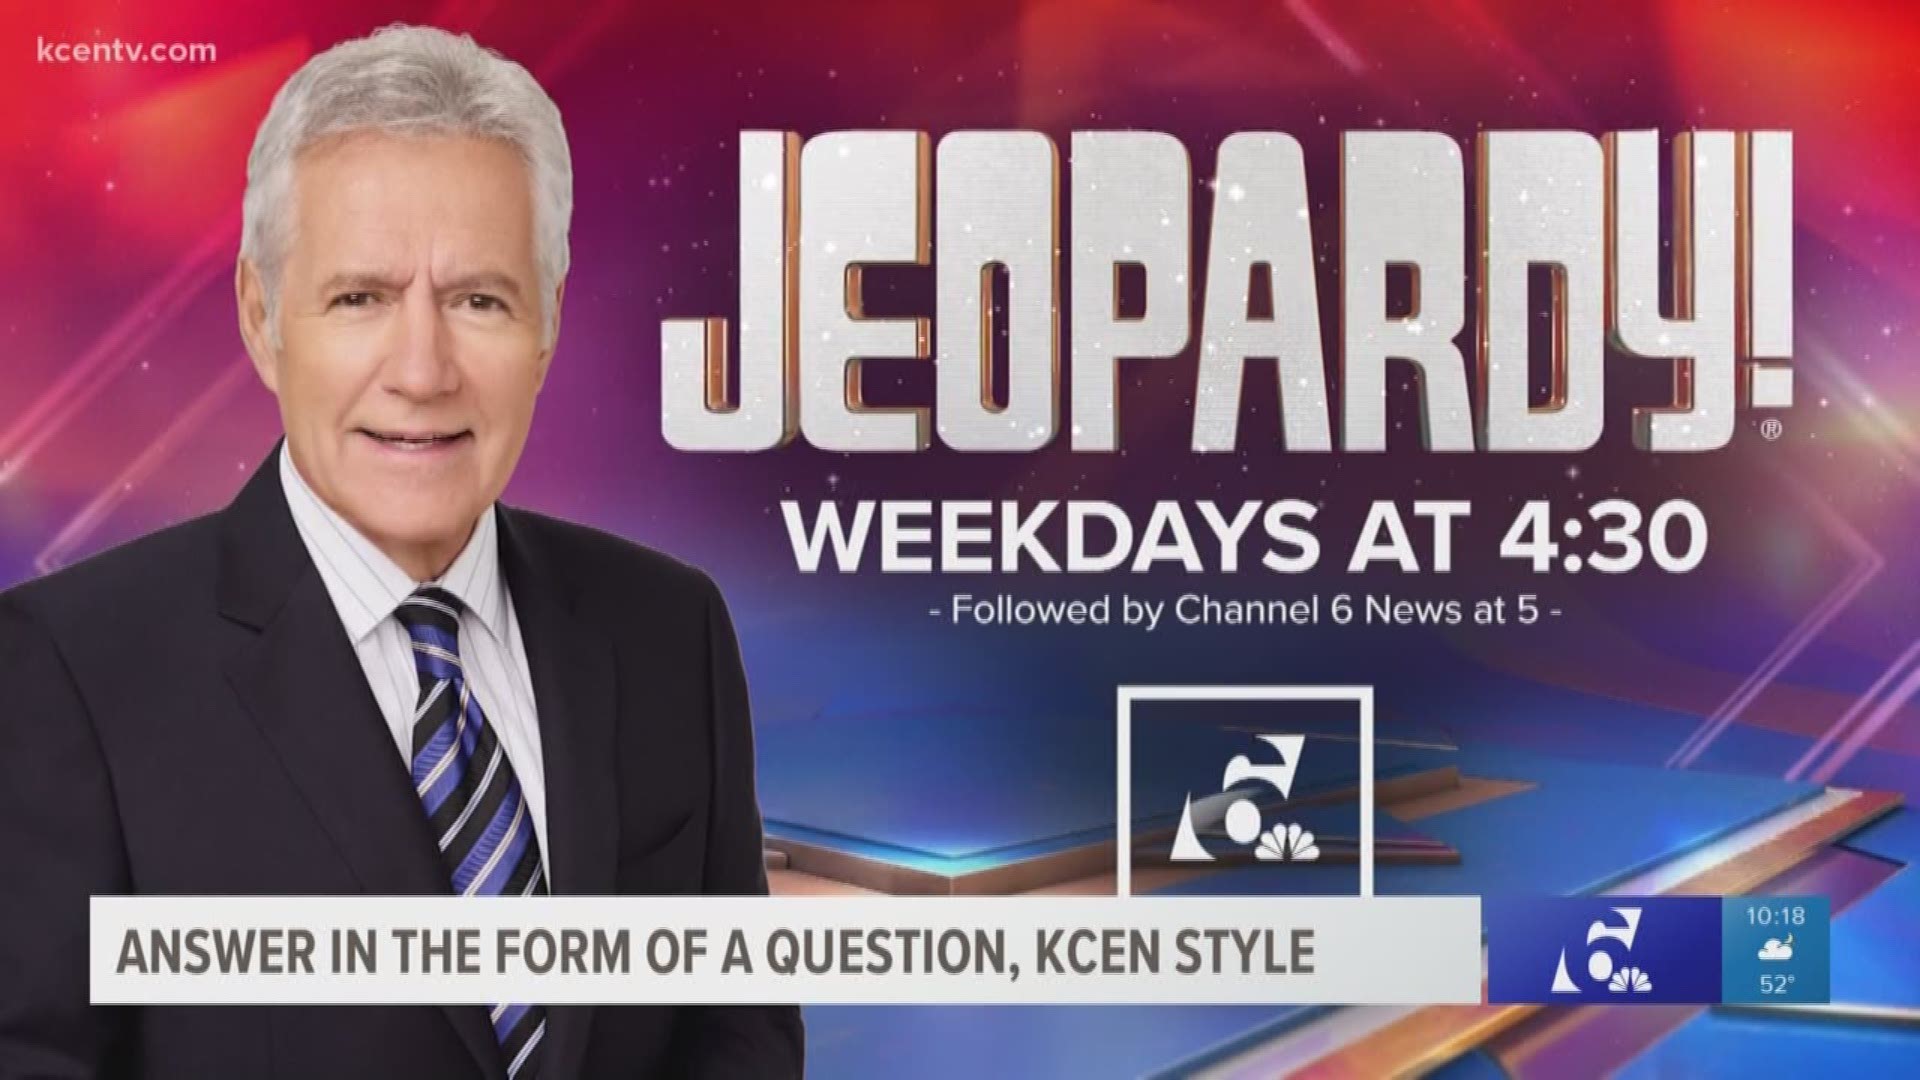 Our very own Kris Radcliffe gave clues for an upcoming season of Jeopardy.